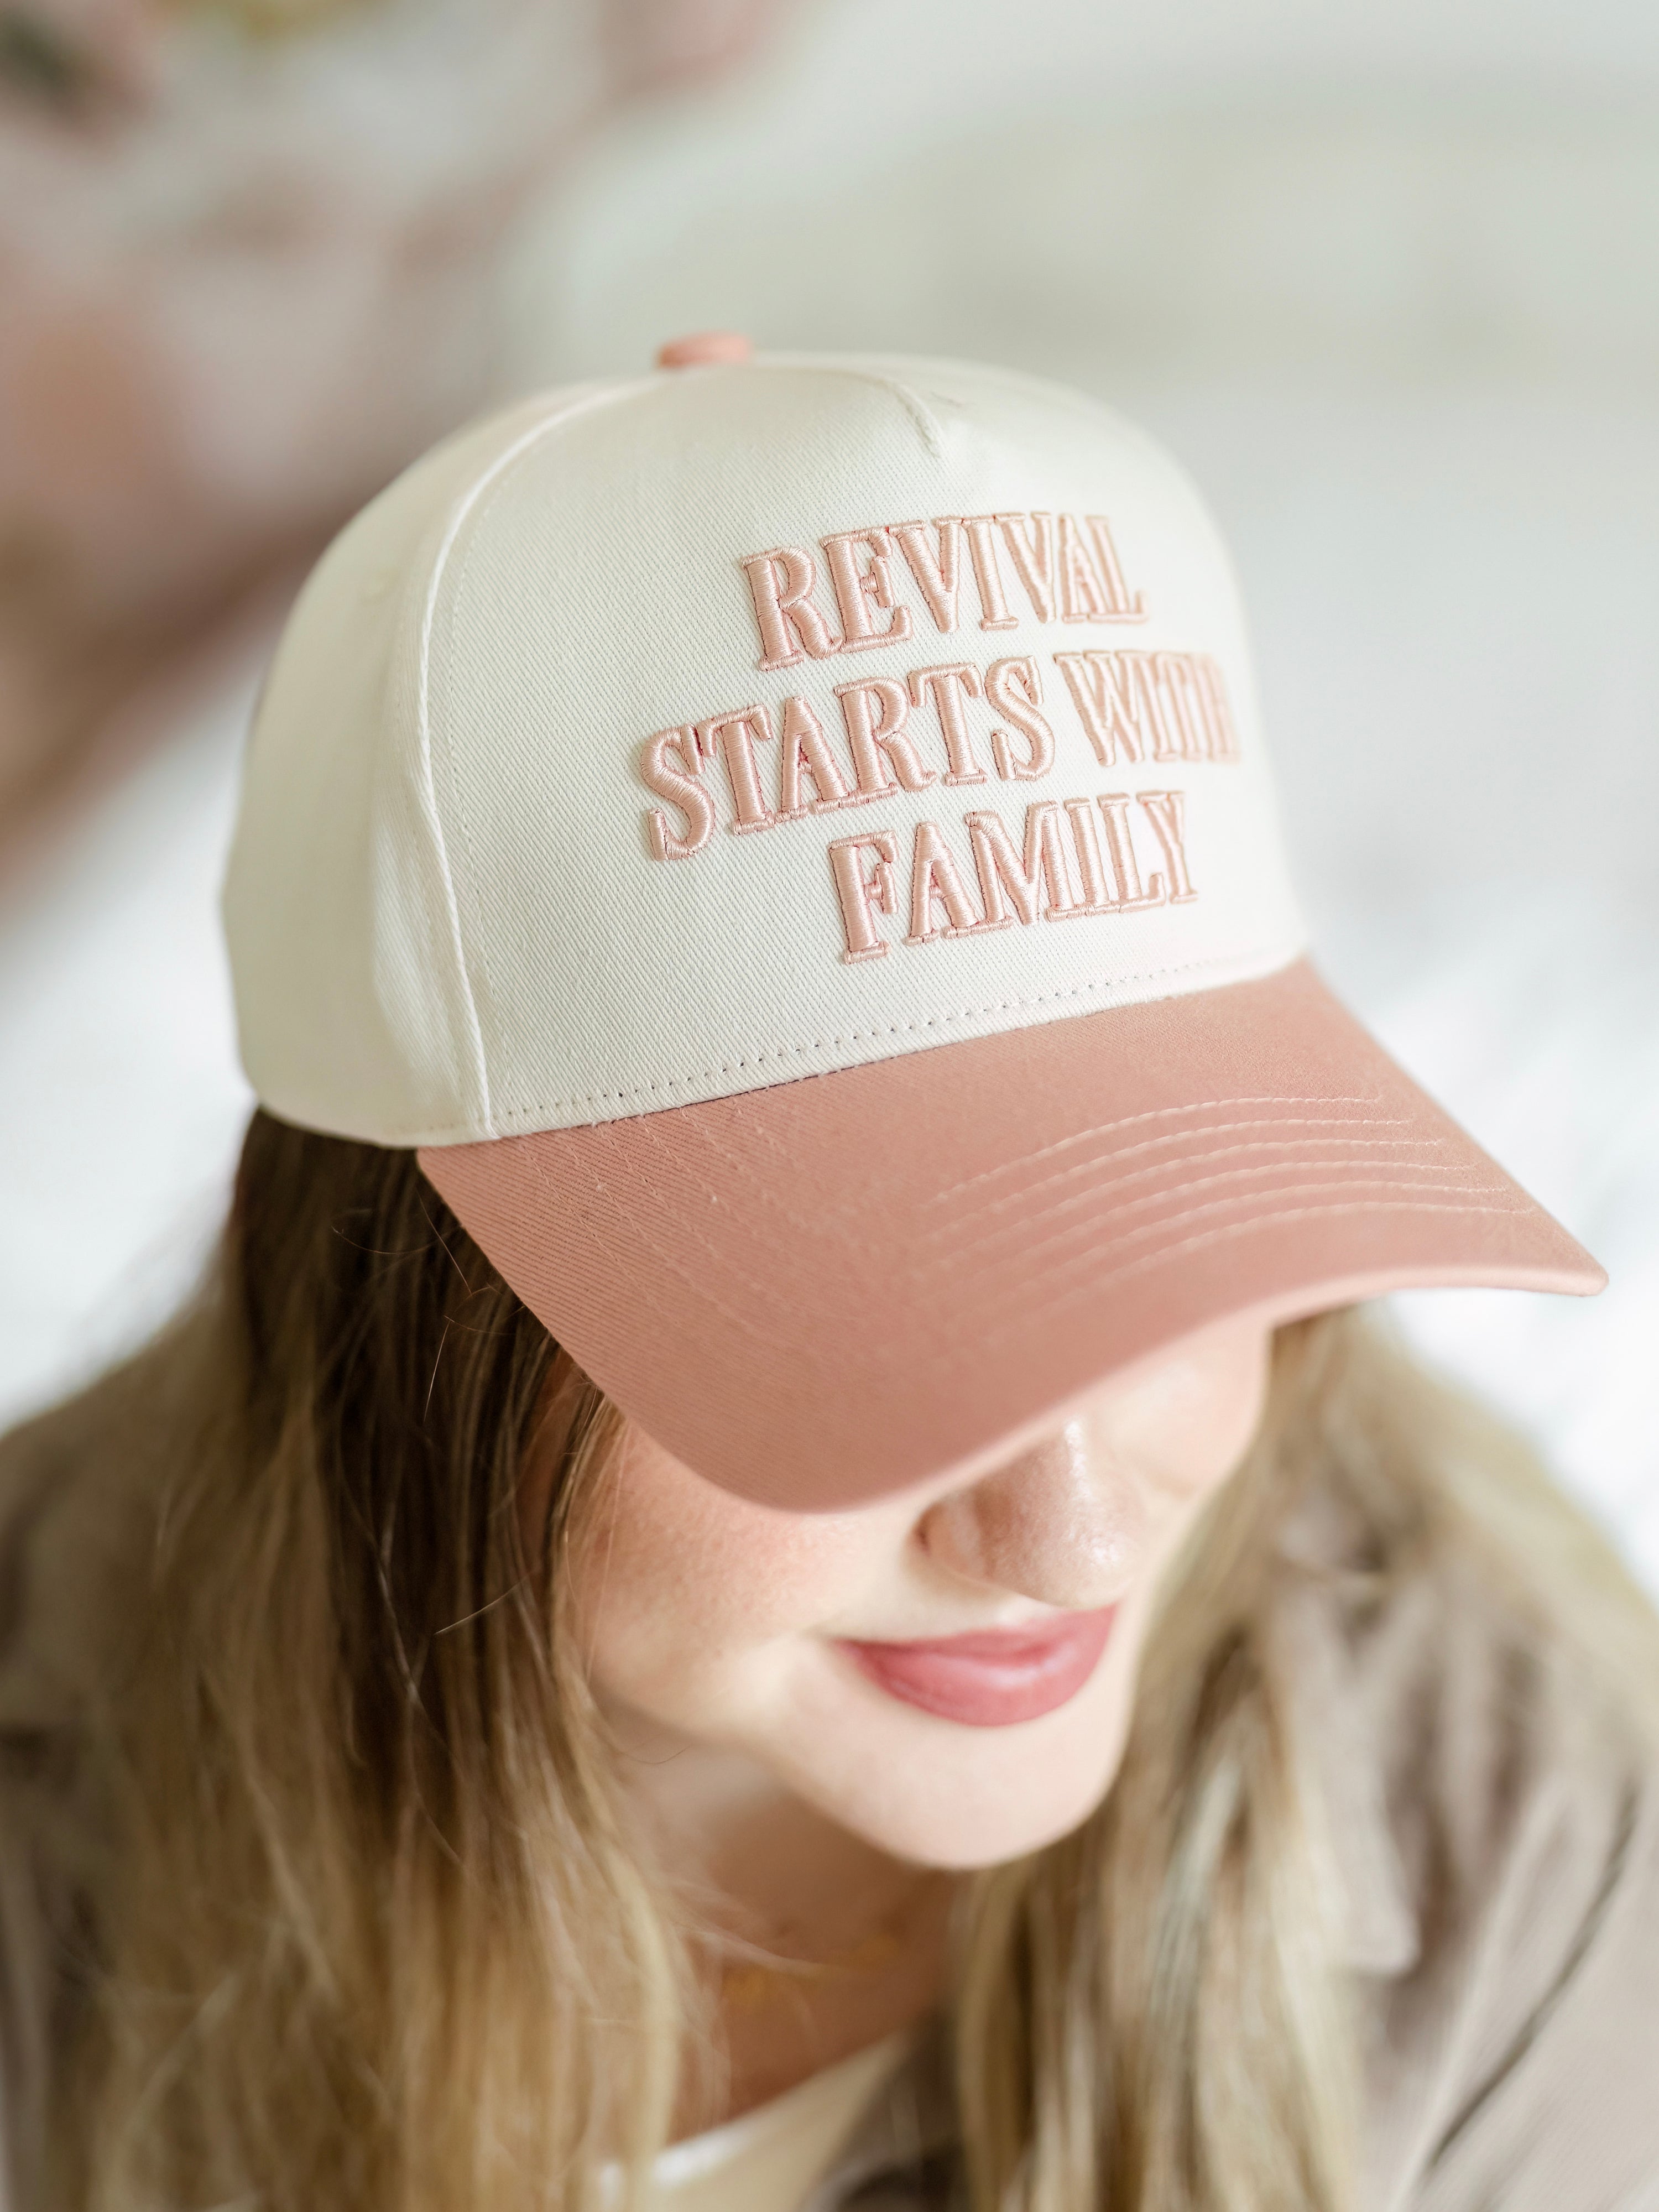 Hat: Revival Starts with Family